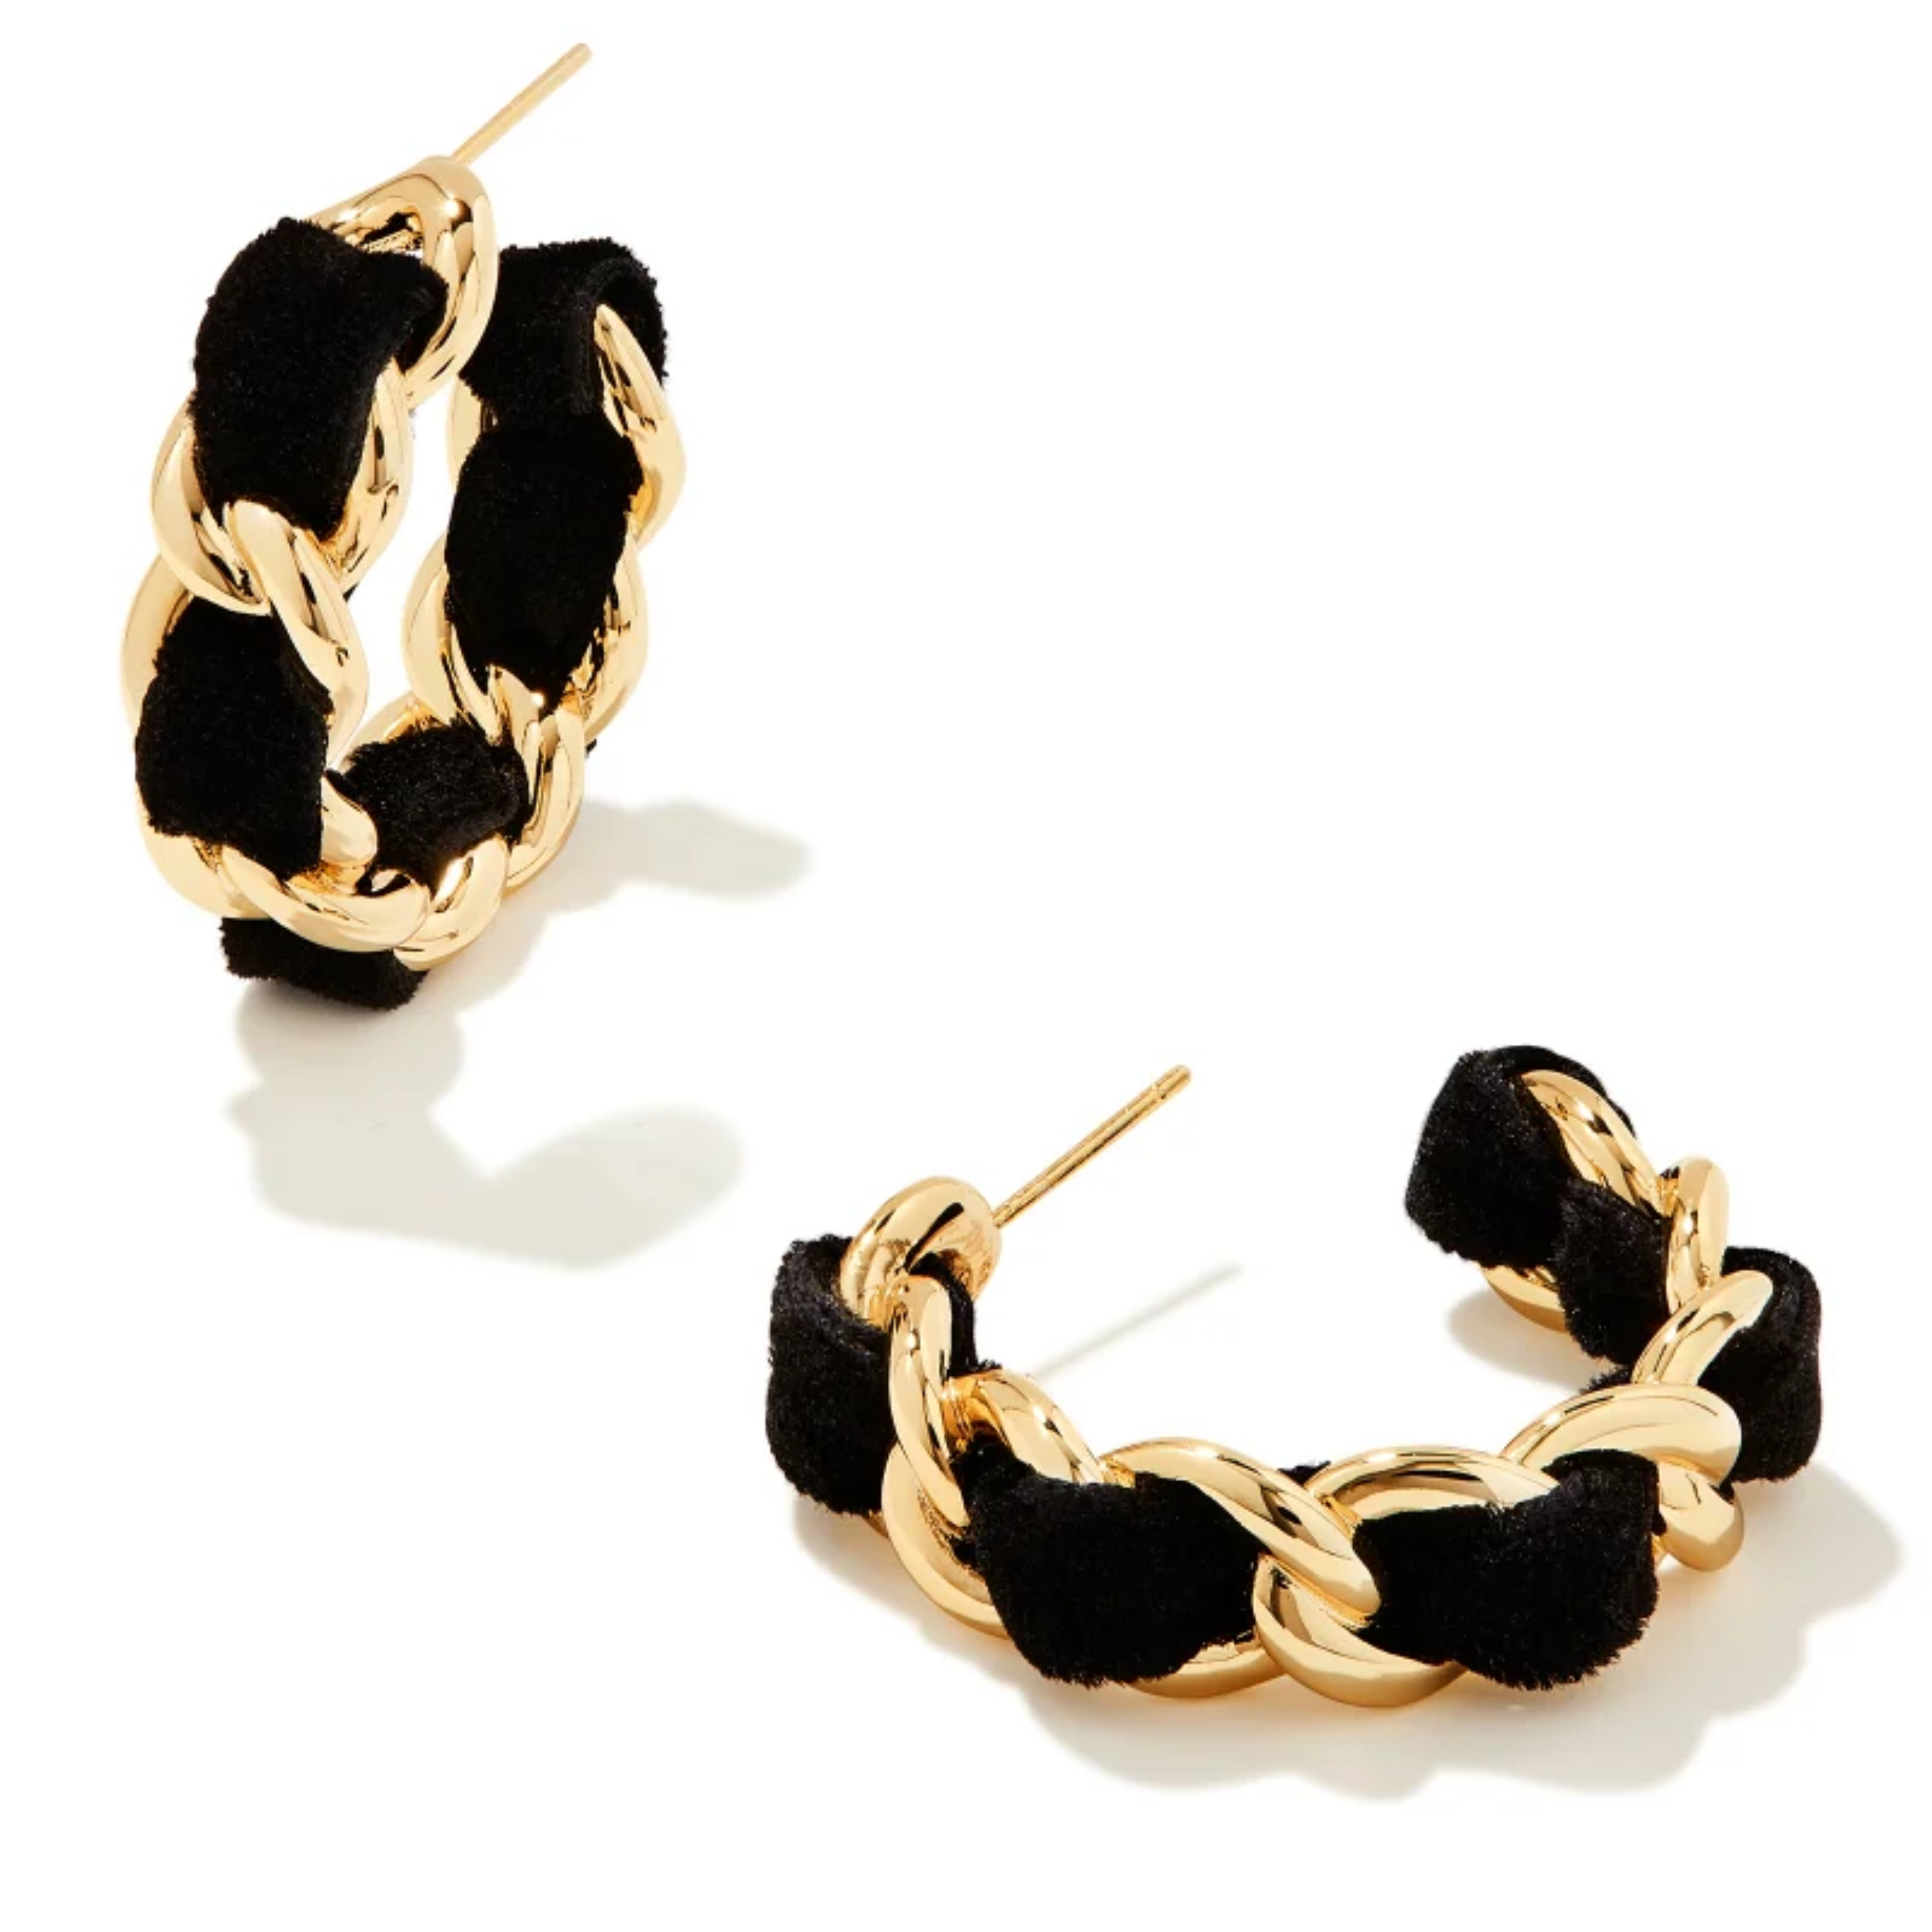 These Everleigh Velvet Gold Hoop Earrings in Black by Kendra Scott are pictured on a white background.